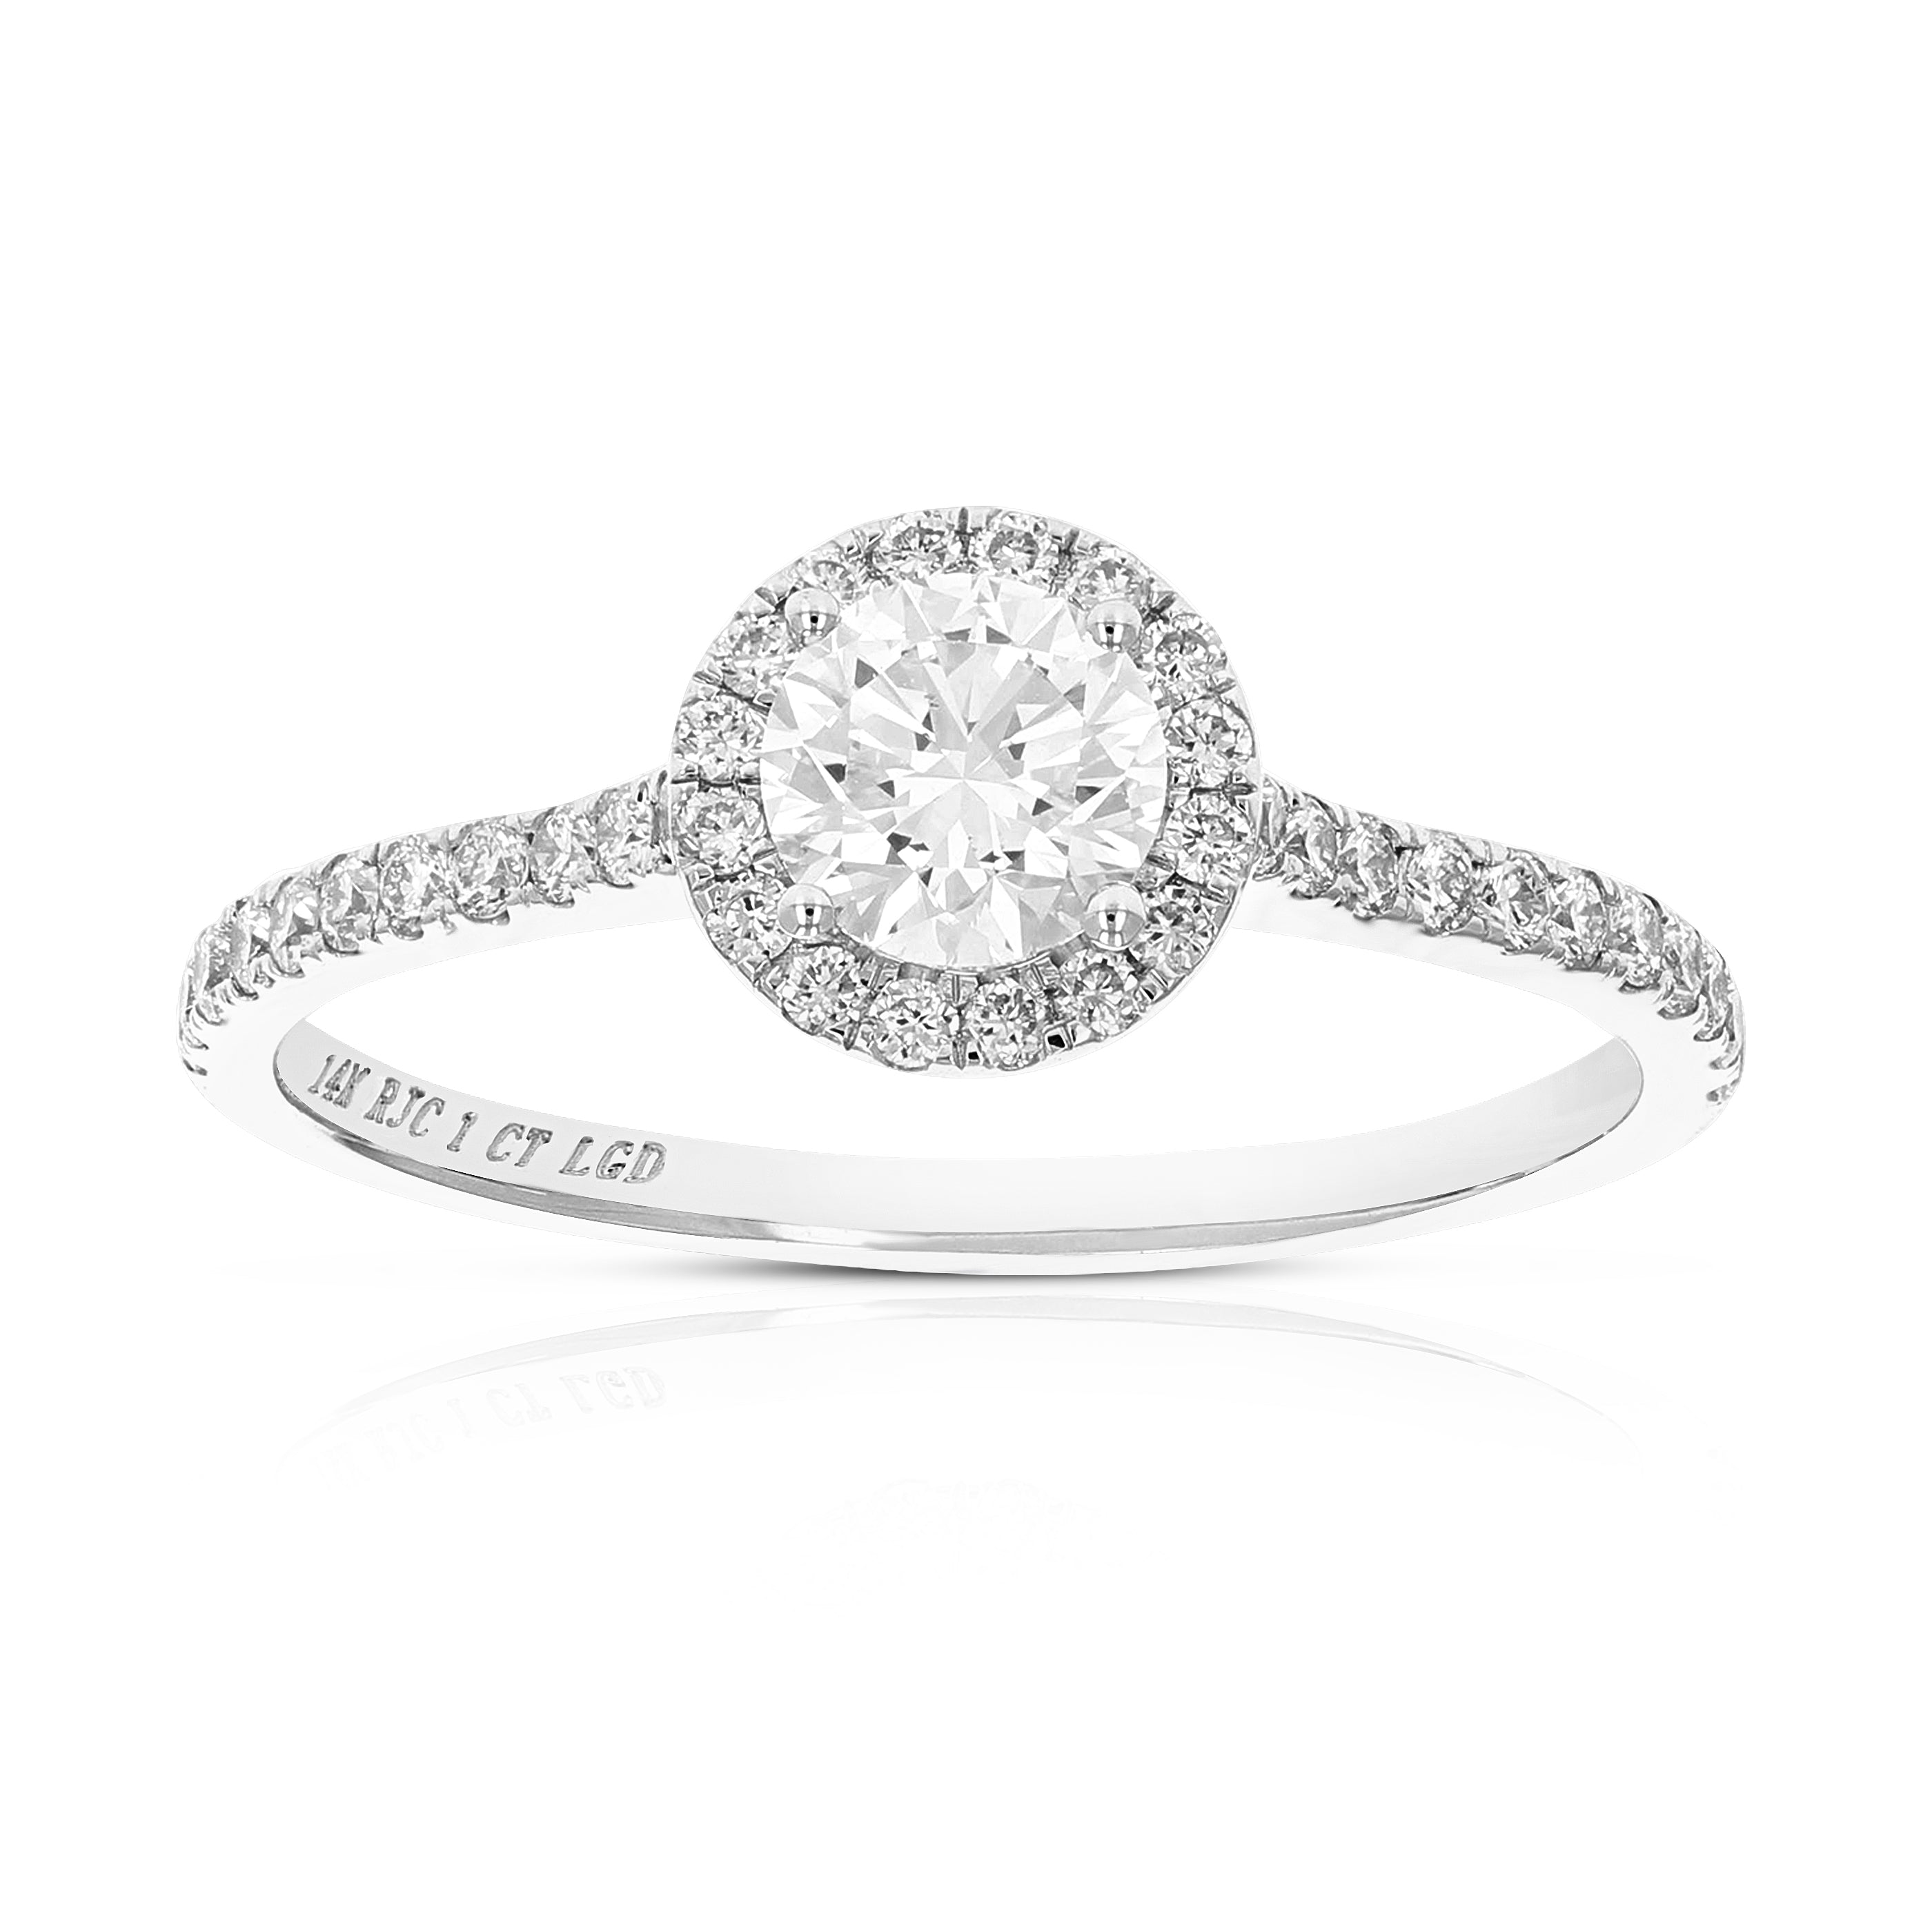 1 cttw Wedding Engagement Ring for Women, Round Lab Grown Diamond Ring in 14K White Gold, Prong Setting